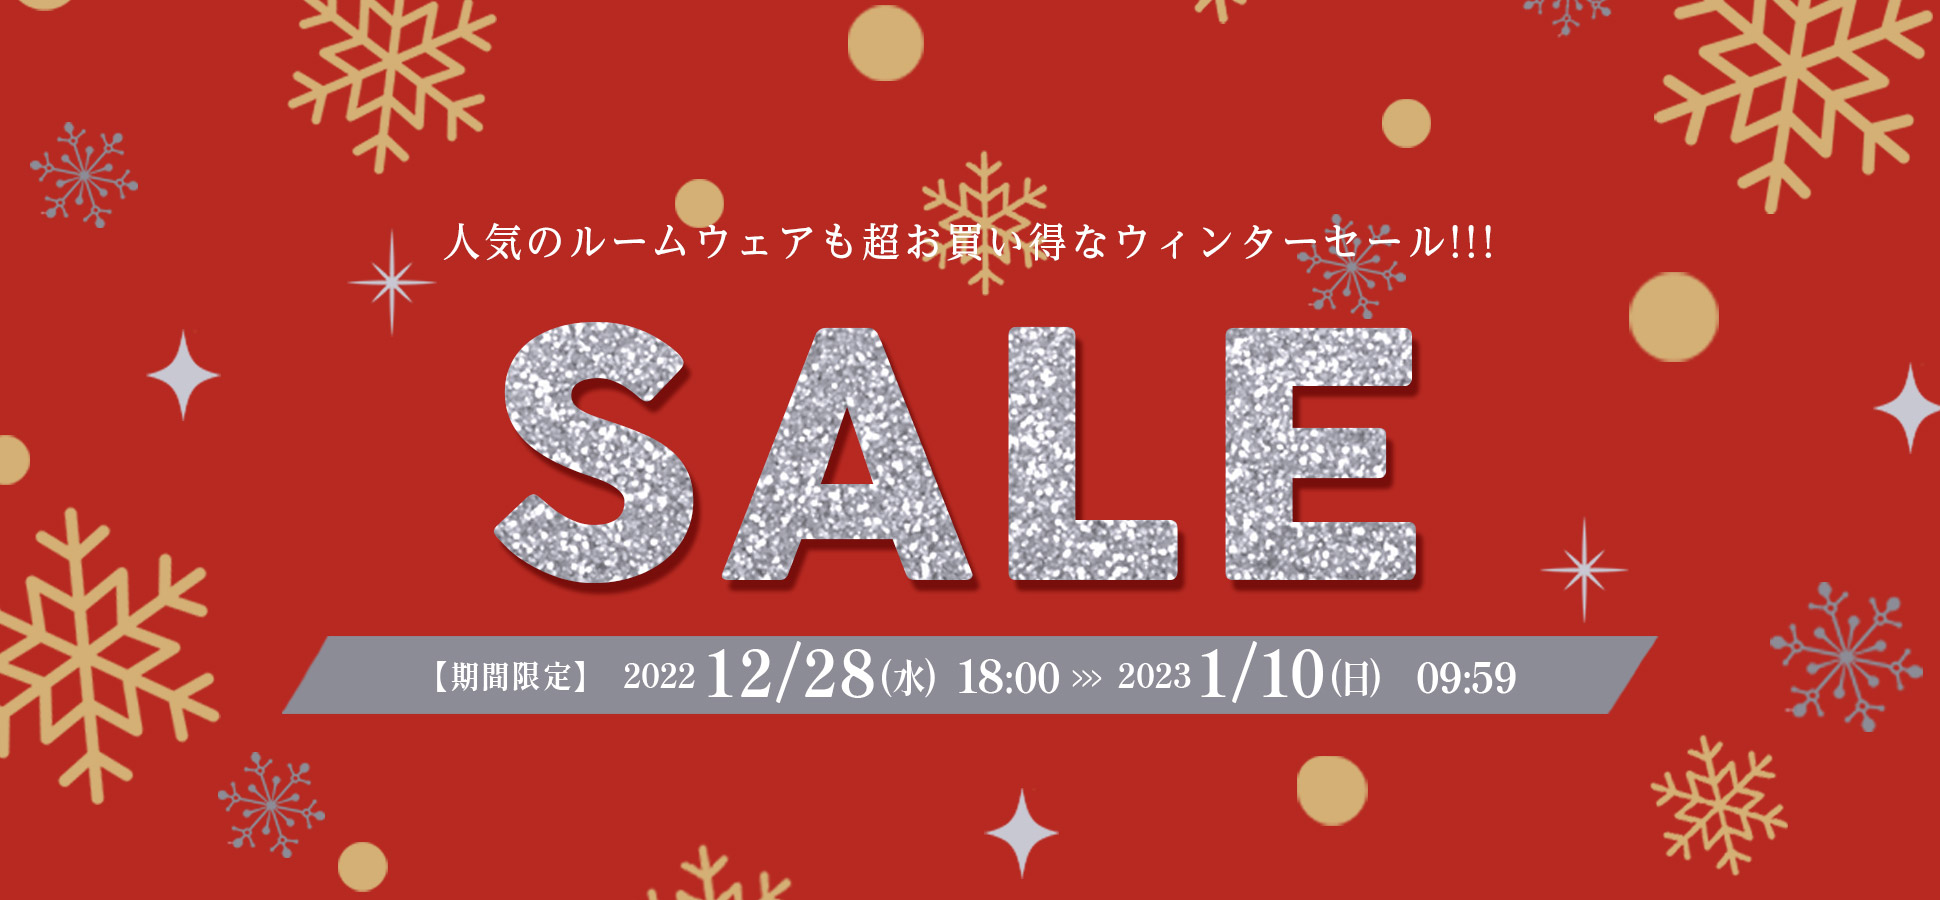 NEW YEAR SALE!